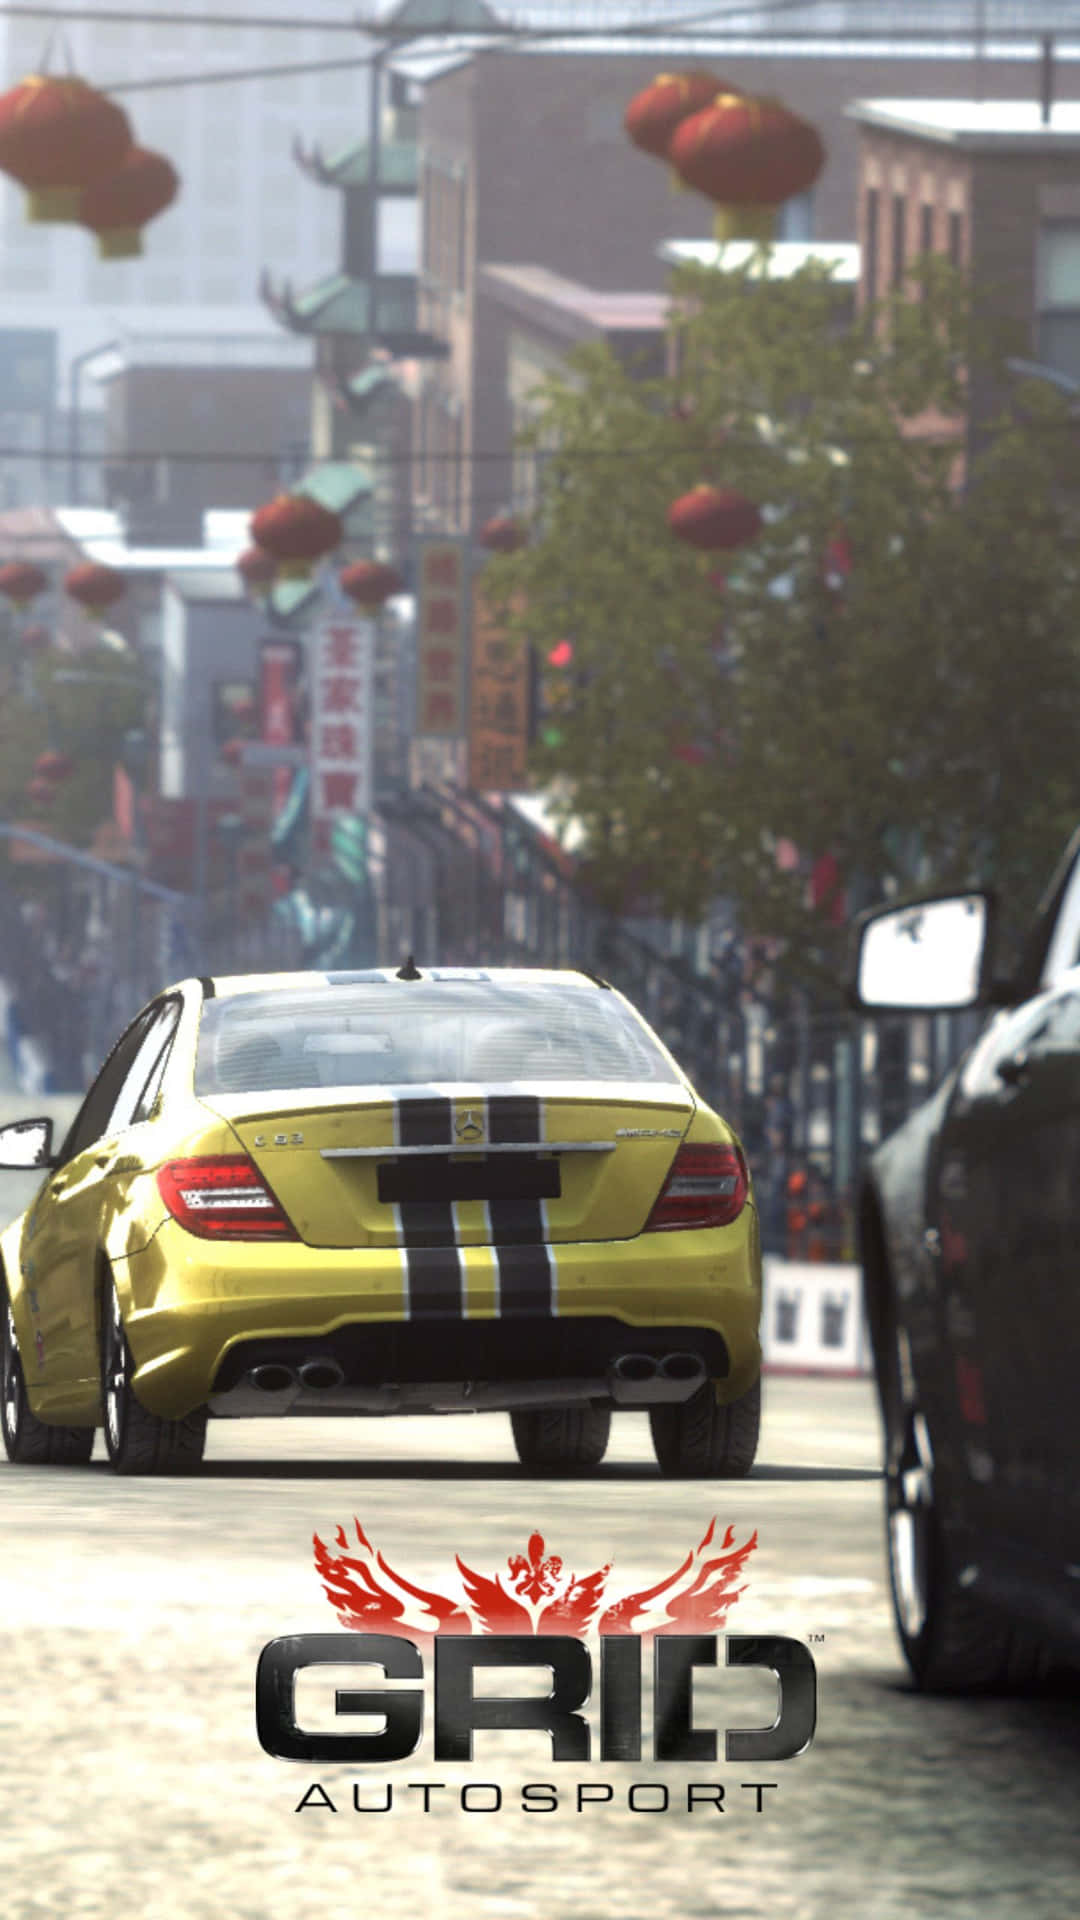 Drive the best racing cars and achieve greatness with Android Grid Autosport